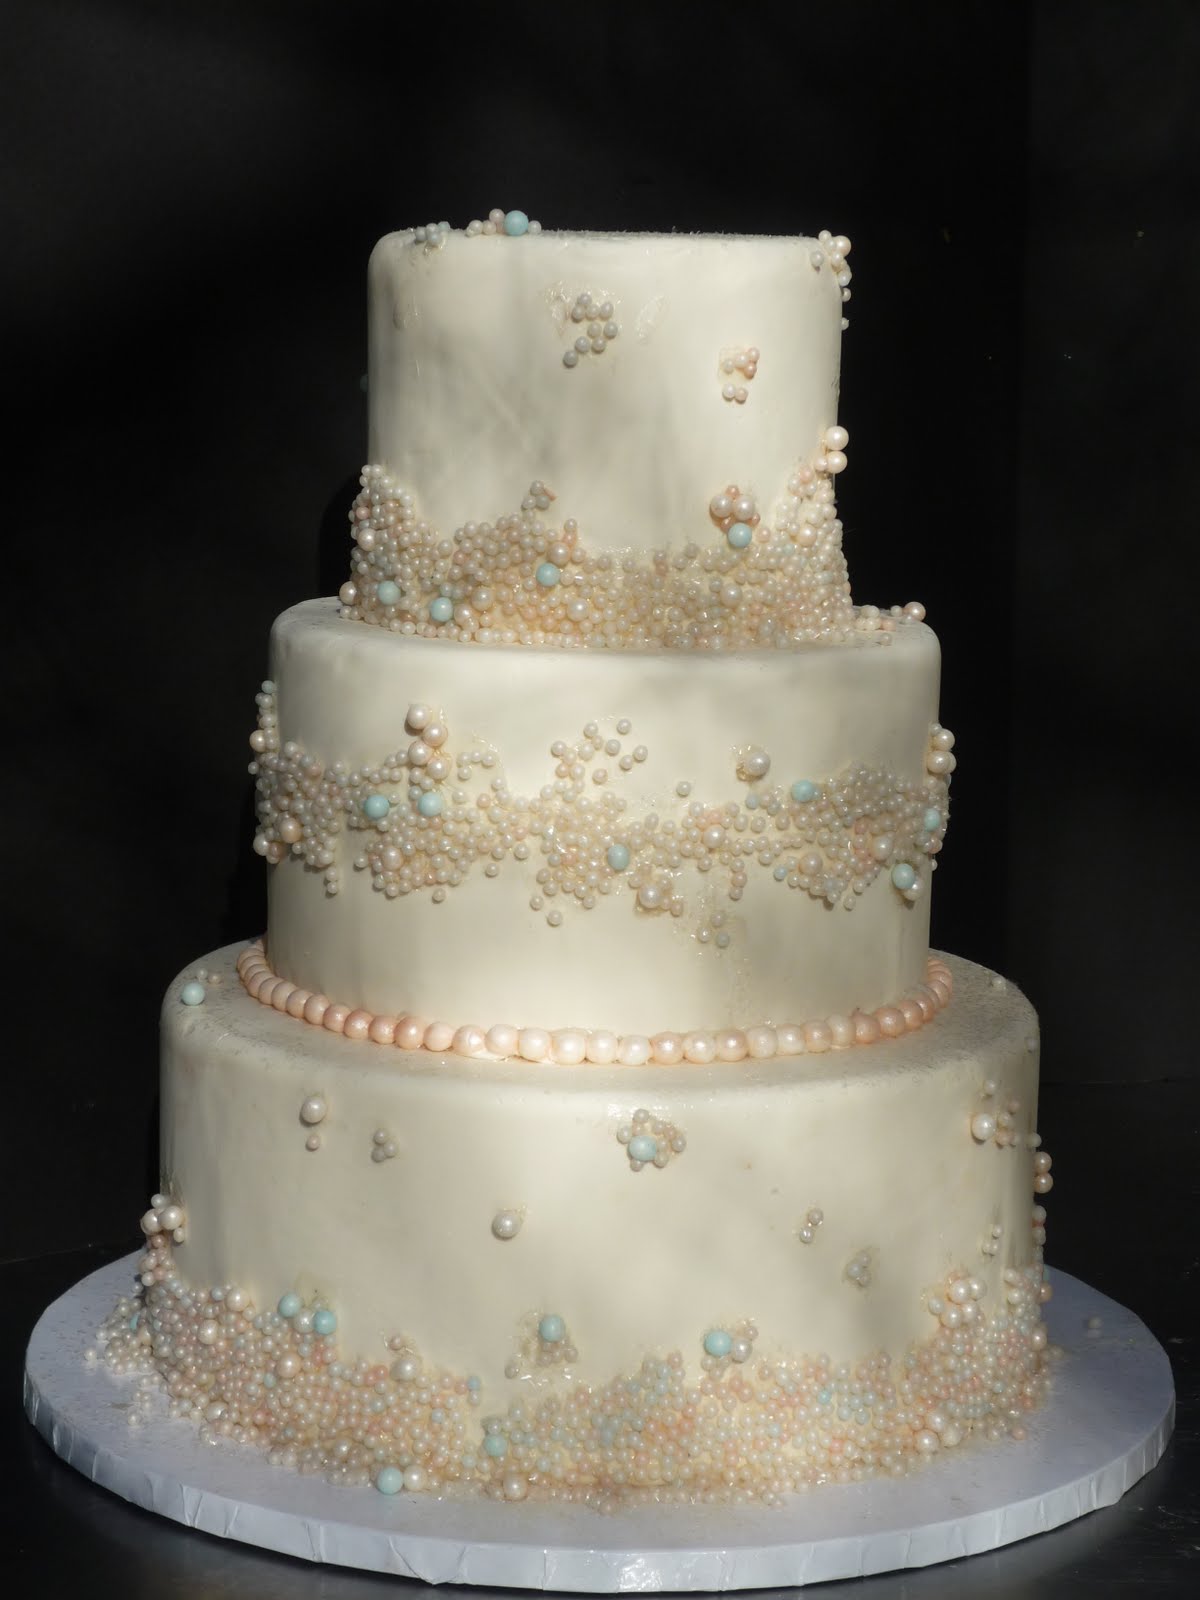 floral wedding cake images Wedding Cake: Fondant Tiers with Pearls